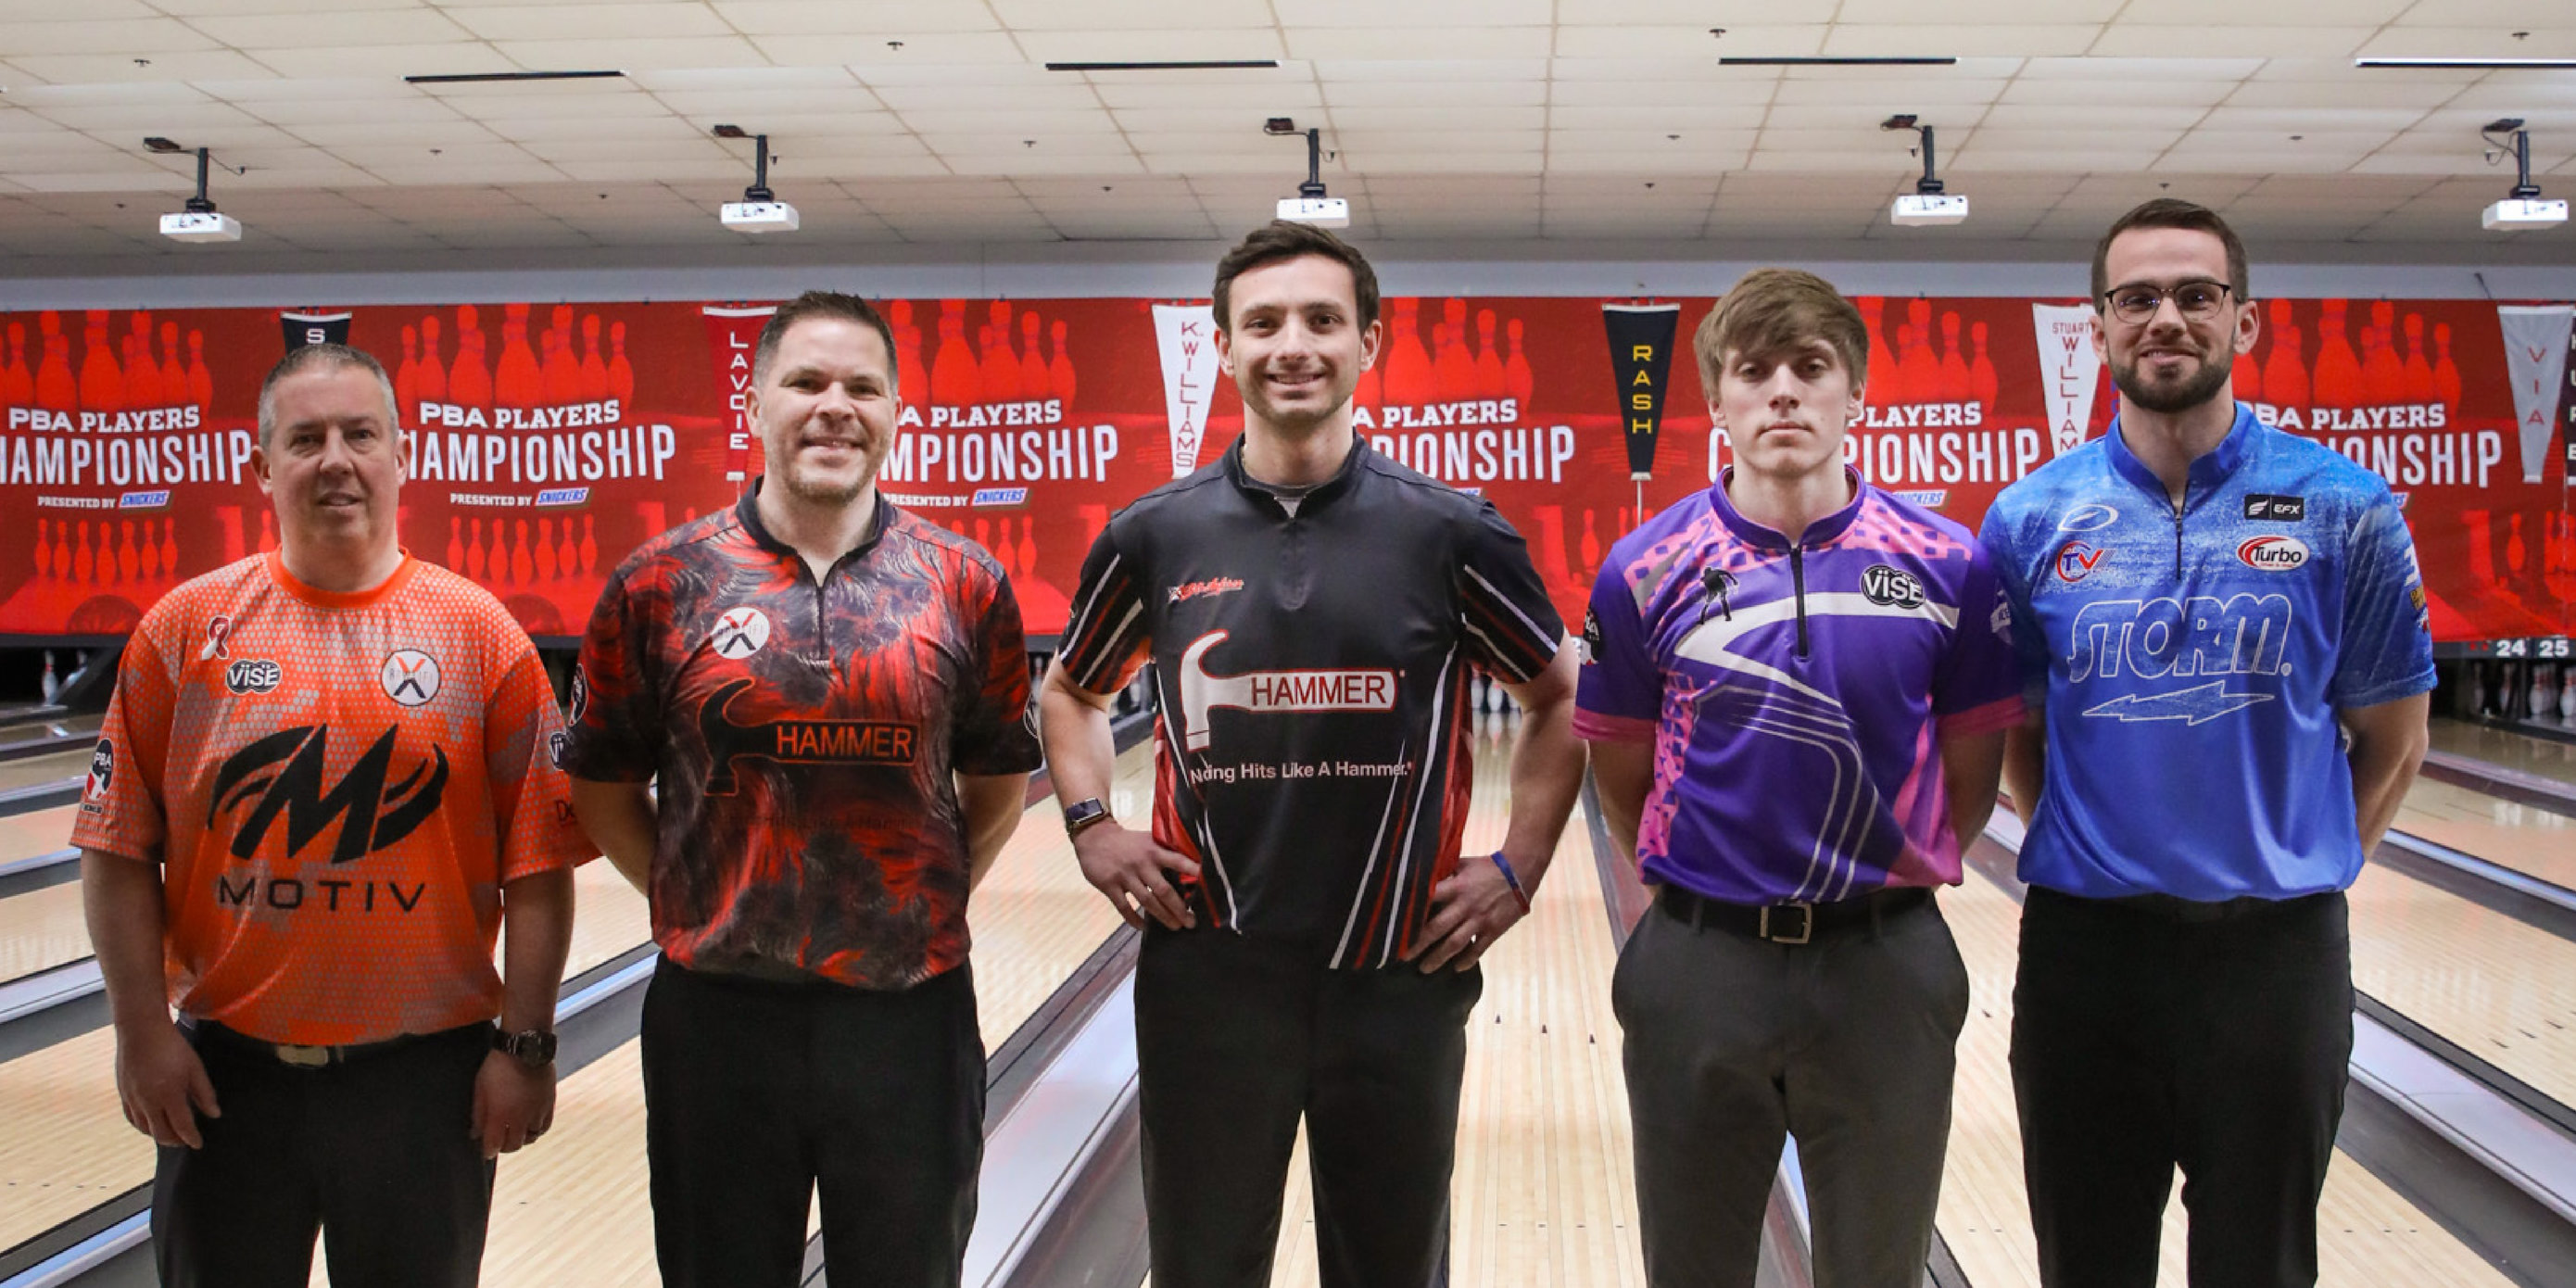 Tom Smallwood Earns Top Seed, Ryan Barnes Steals the Show at PBA